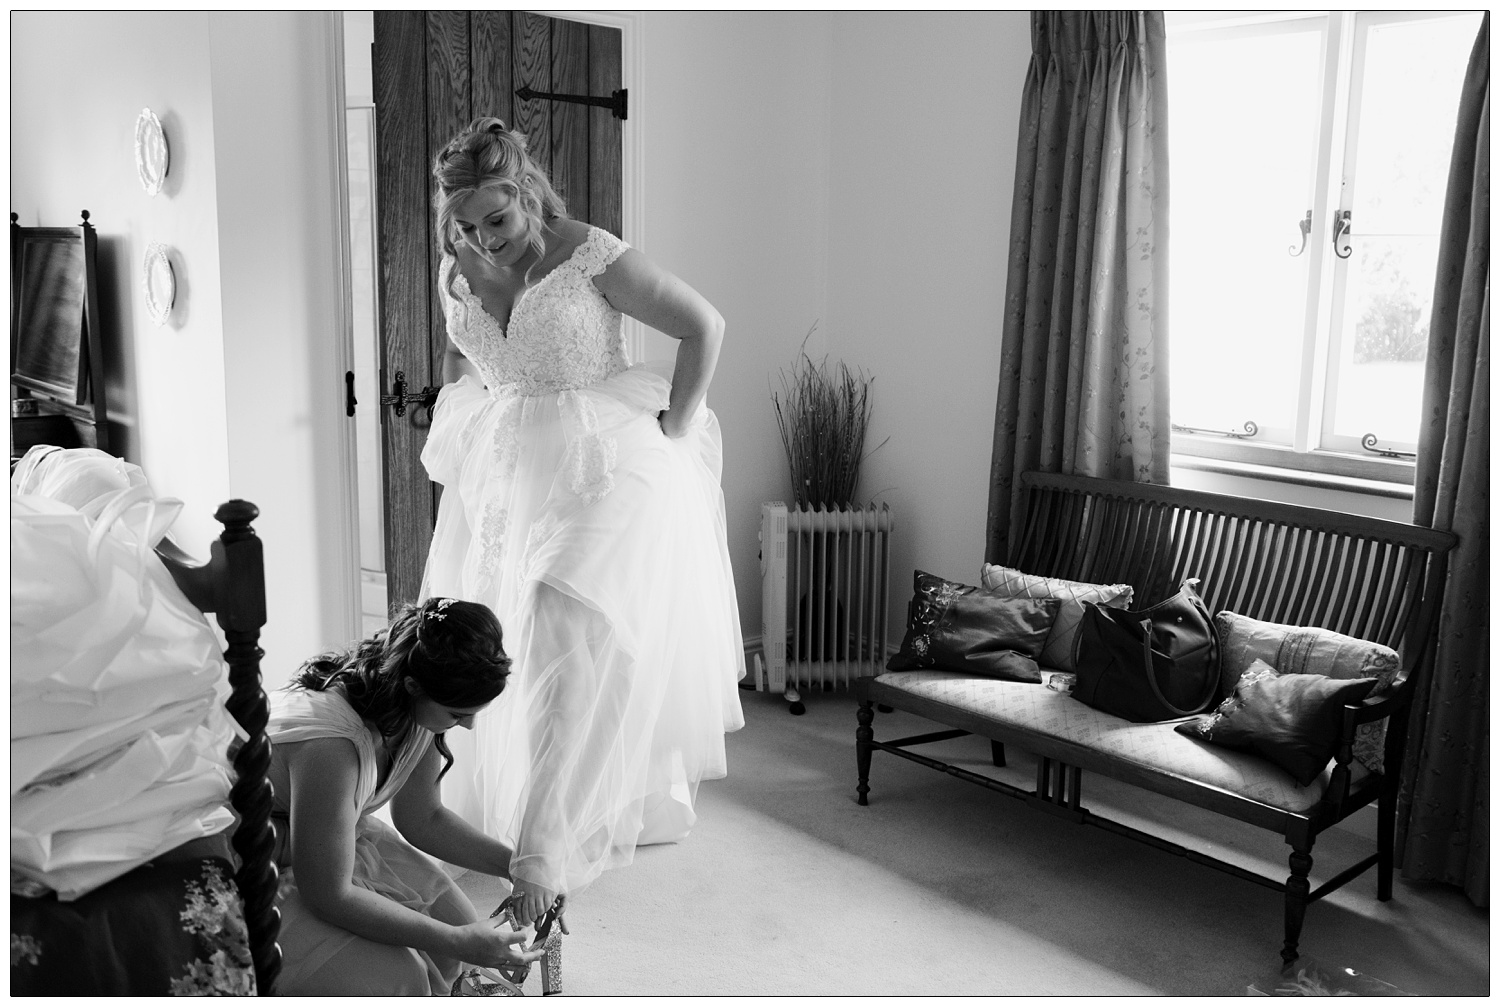 Bridesmaid putting on the bride's shoes in a bedroom.